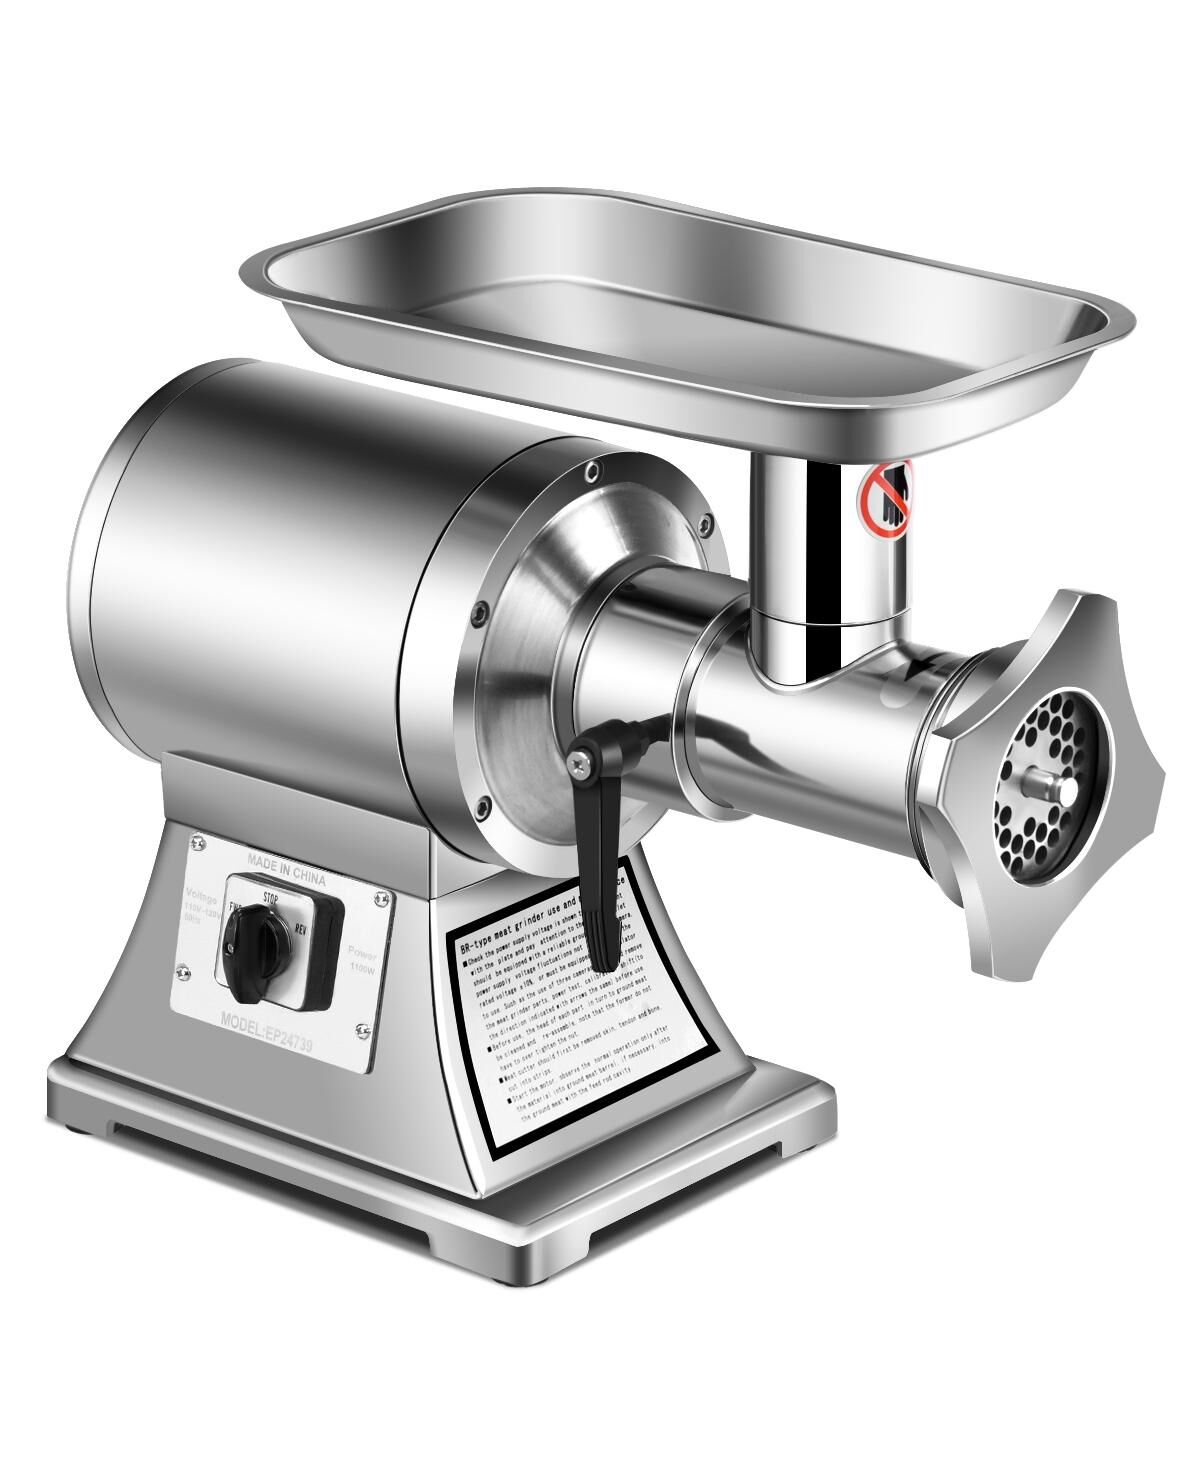 Sugift Heavy Duty 1.5HP 1100W 550LB/h Commercial Grade Meat Grinder - Silver